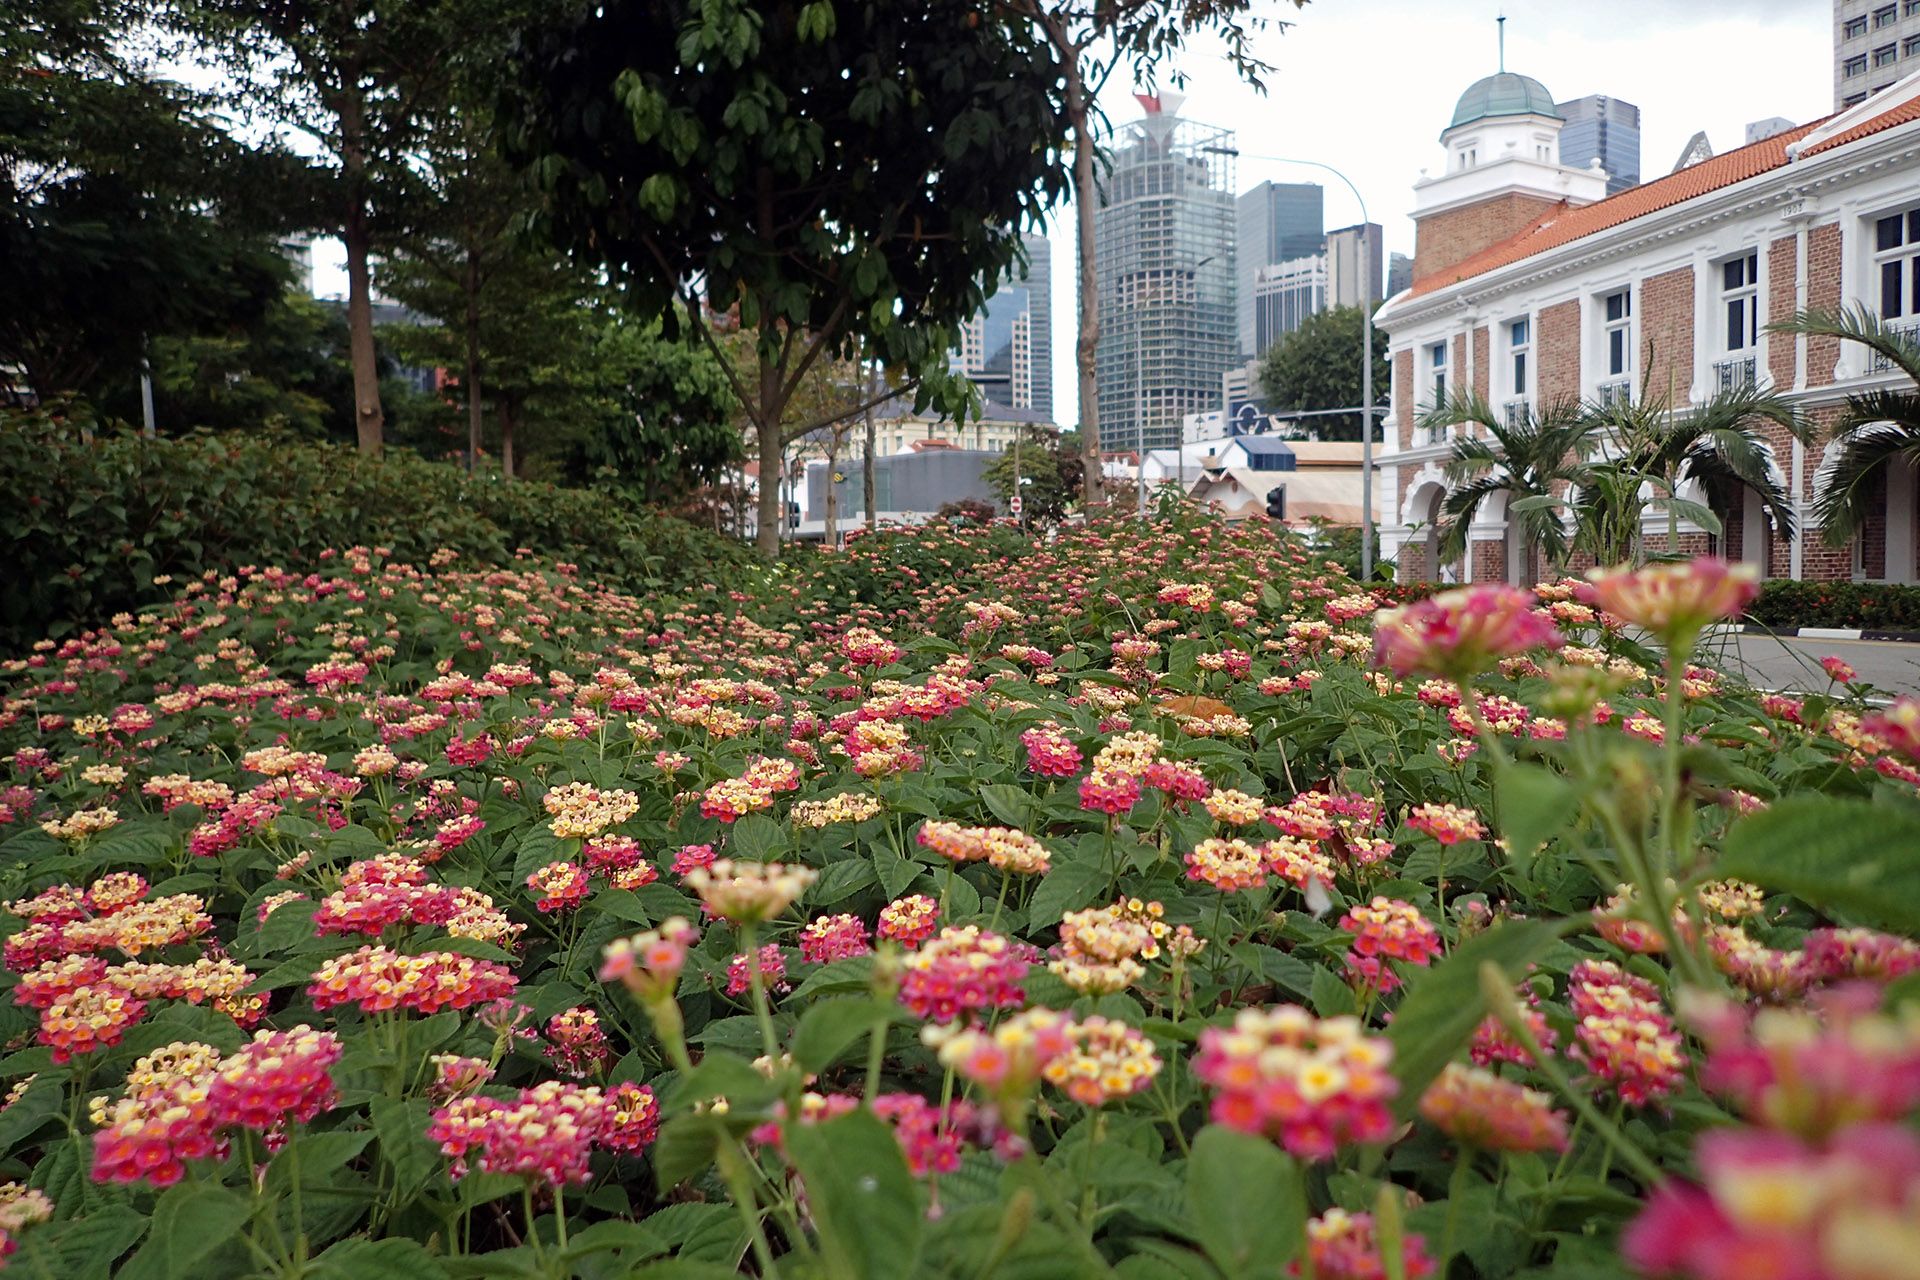 Vibrant pink and yellow Lantanas along Neil Road on March 1. Nectar-rich flowers make this evergreen shrub ideal for butterfly gardens. ST PHOTO: NEO XIAOBIN